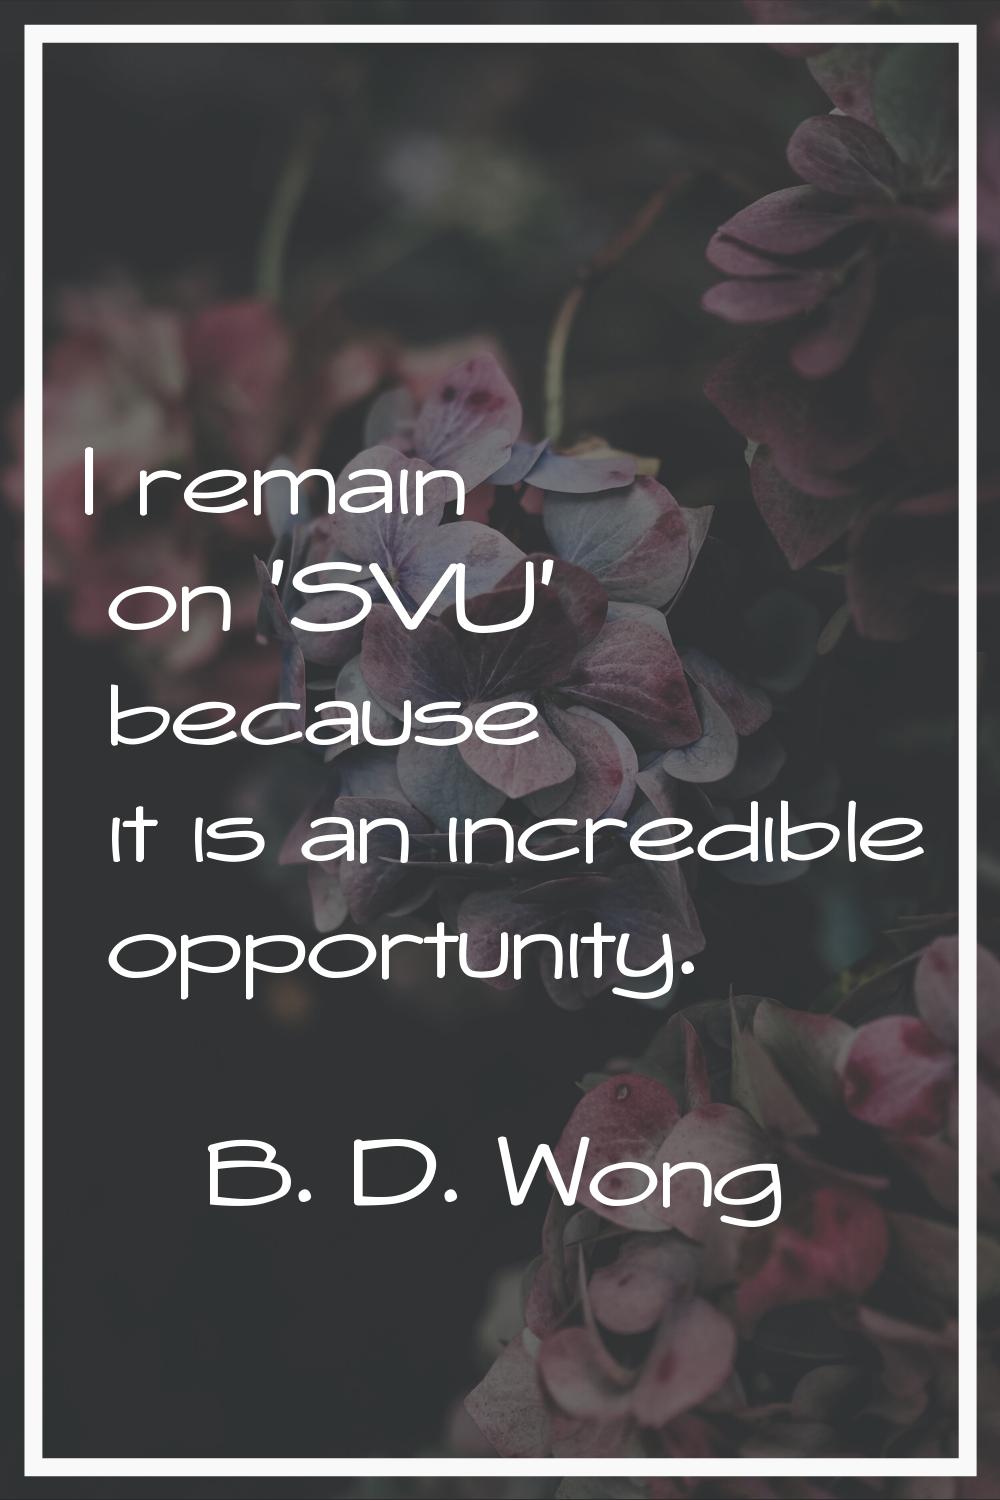 I remain on 'SVU' because it is an incredible opportunity.